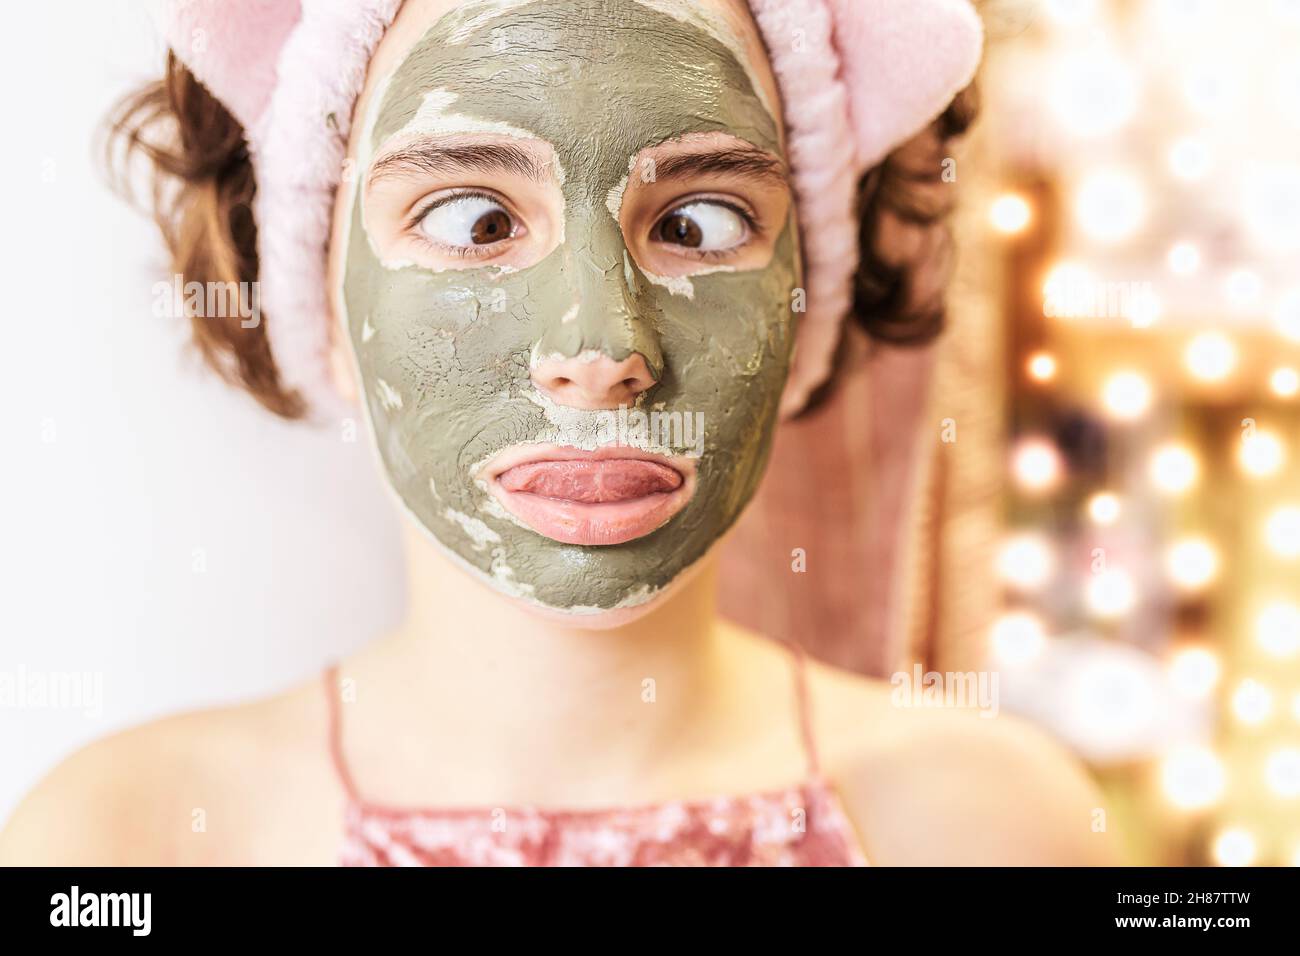 portrait of a teenage girl with brown hair with a gray clay cosmetic mask on her face with a funny grimace. Playful mood, make faces, slanted eyes. Stock Photo